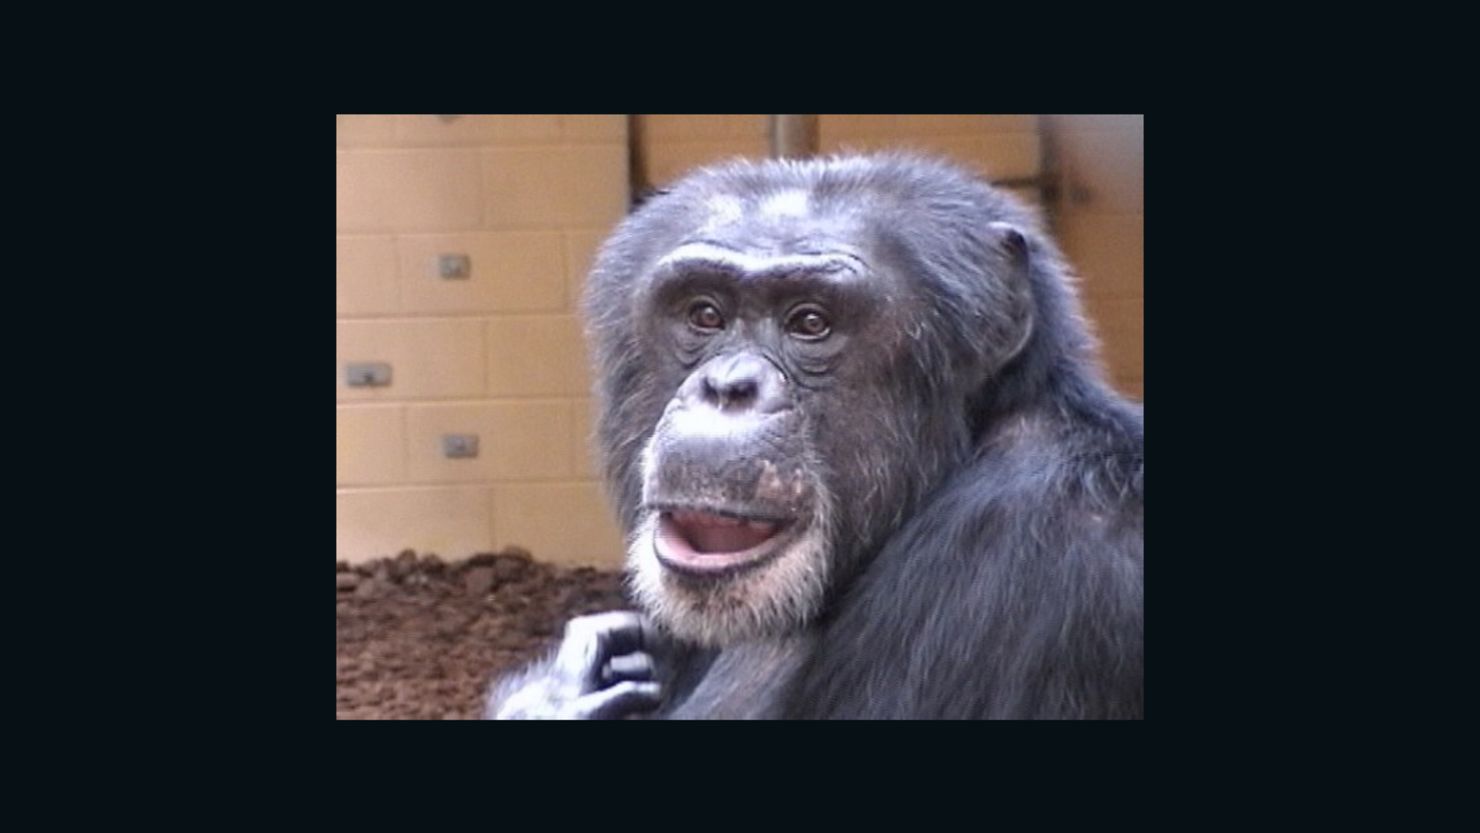 Sherman the chimp took a memory test and got a reward for right answers, and the experiment showed he had a complex thought pattern.